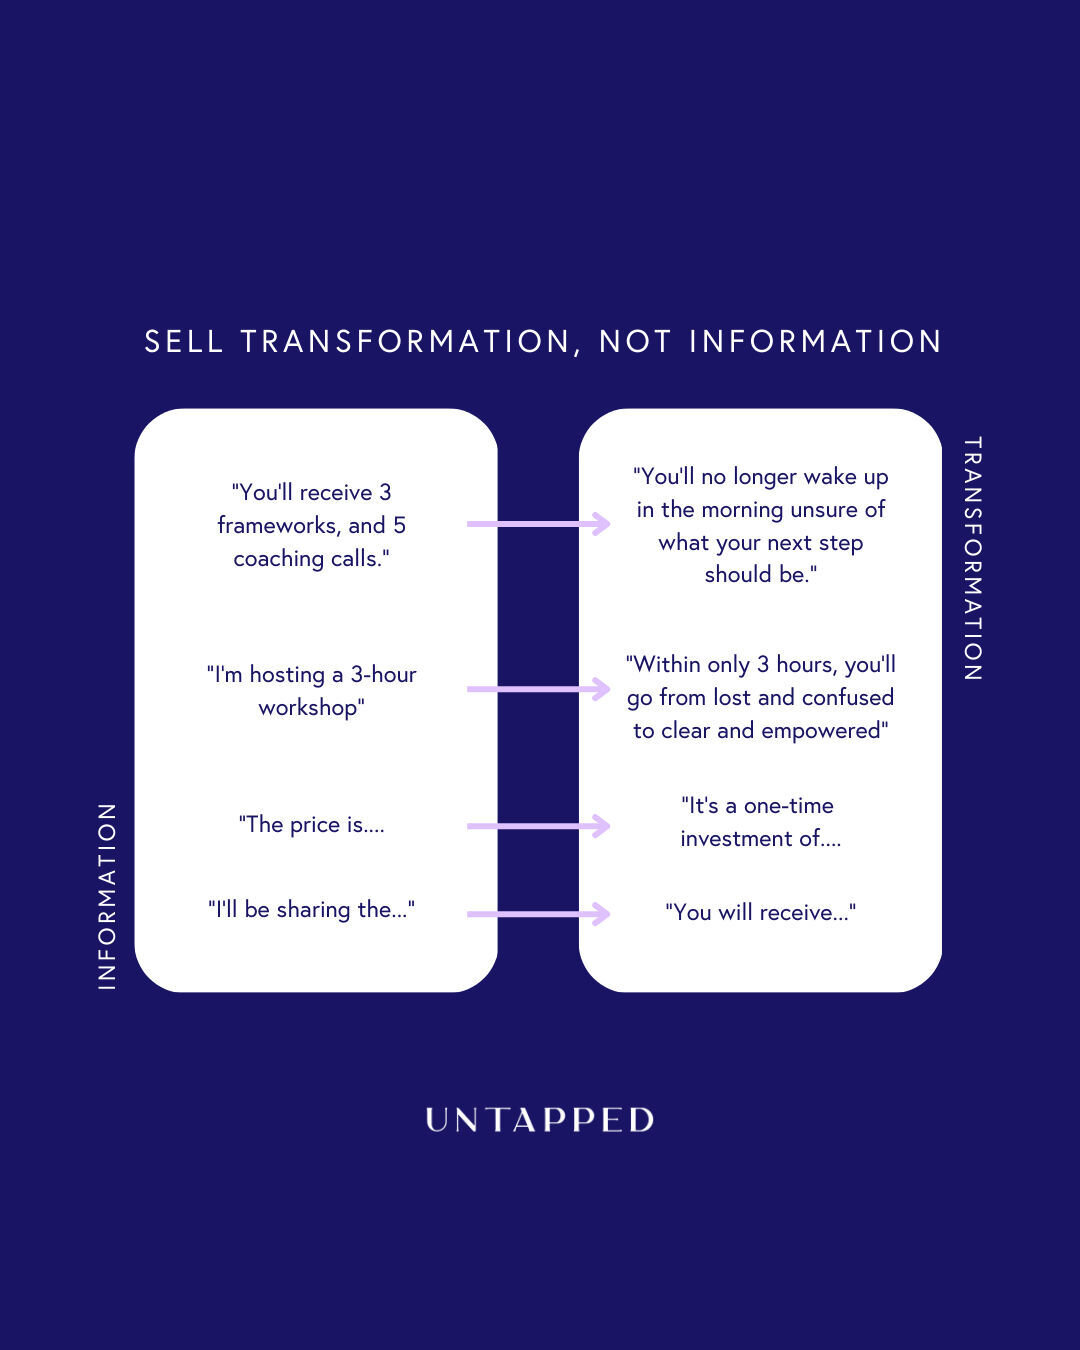 &quot;Sell the destination, not the plane ticket!&quot; - Briony McKenzie

One of the key fundamentals of sales is shifting your language from INFORMATION to TRANSFORMATION!

Ultimately, as humans we purchase through emotion. And we're sold on the tr